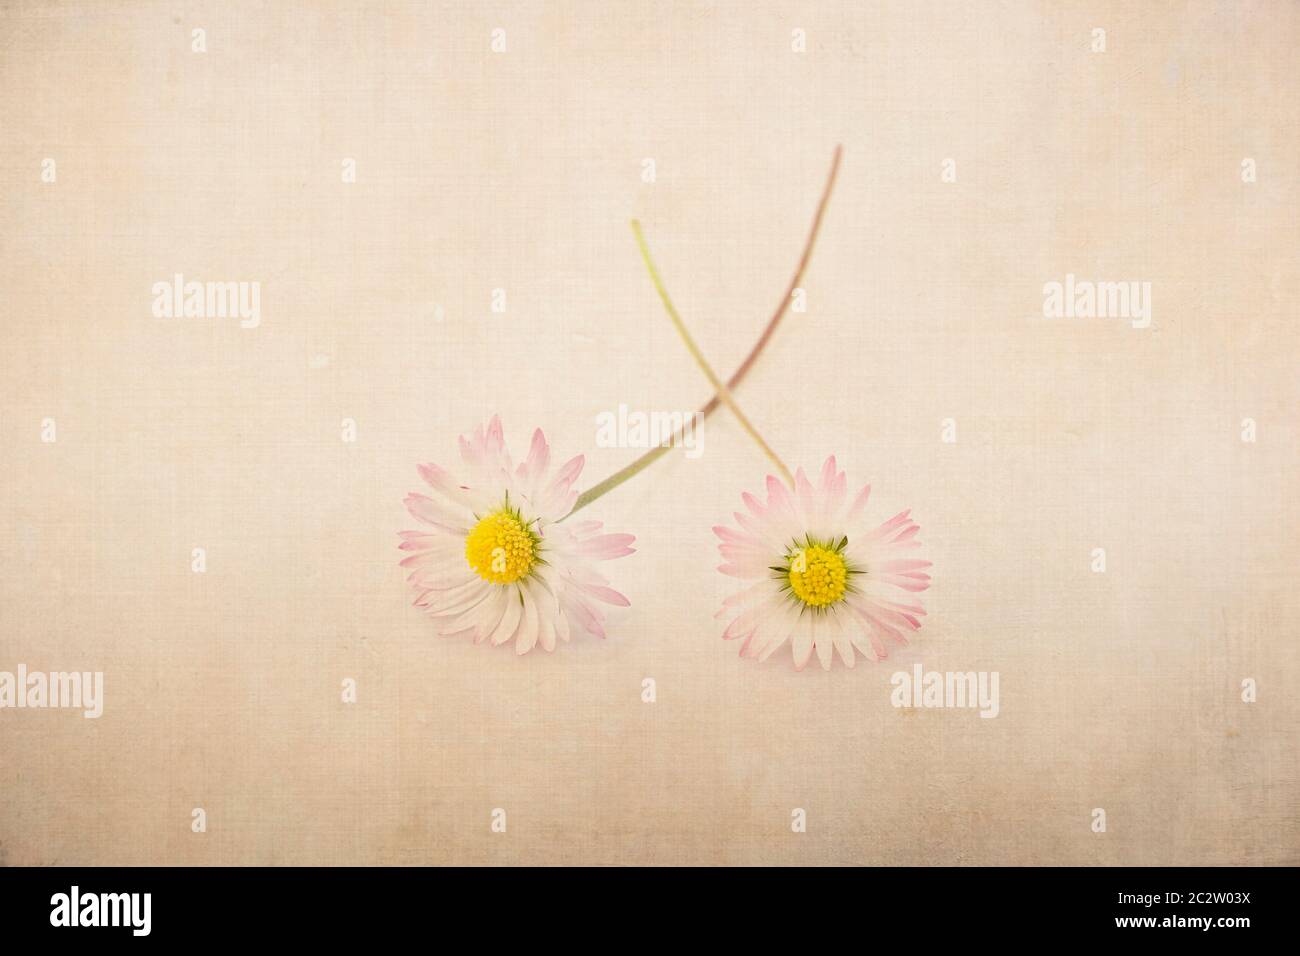 Two Bellis perennis flowers with textured background Stock Photo